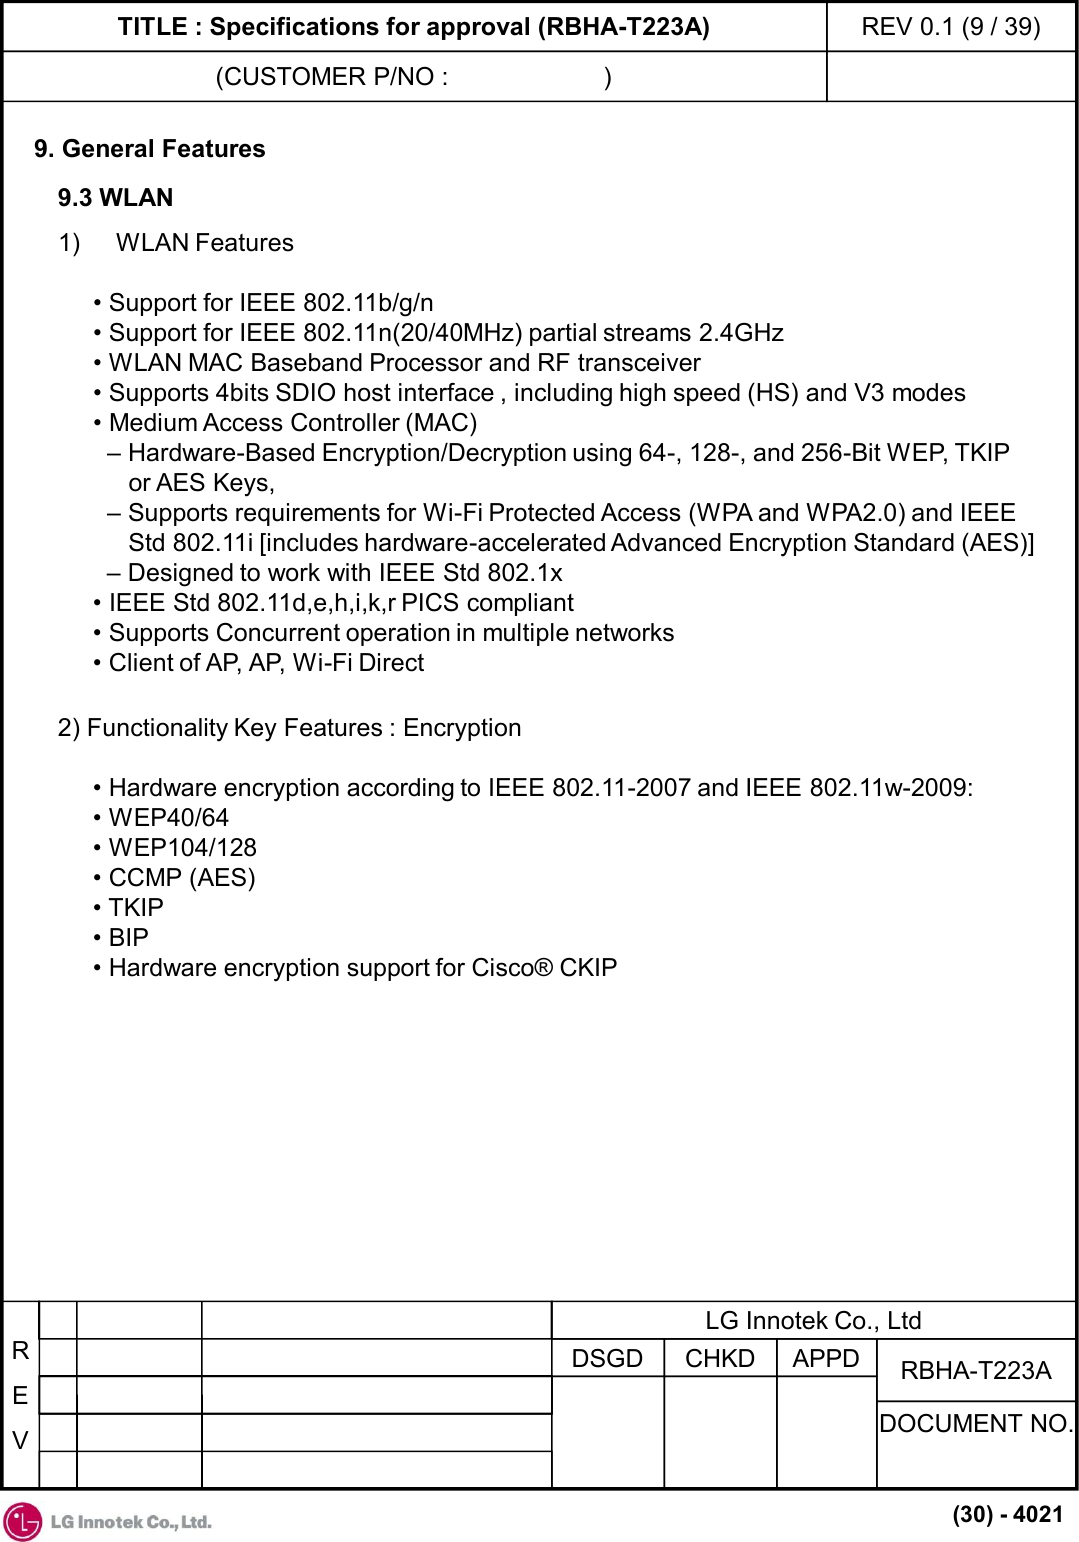 TITLE : Specifications for approval (RBHA-T223A)(CUSTOMER P/NO :                      )REV 0.1 (9 / 39)REVAPPDCHKDDSGDDOCUMENT NO.RBHA-T223ALG Innotek Co., Ltd(30) - 40219. General Features1) WLAN Features• Support for IEEE 802.11b/g/n• Support for IEEE 802.11n(20/40MHz) partial streams 2.4GHz• WLAN MAC Baseband Processor and RF transceiver• Supports 4bits SDIO host interface , including high speed (HS) and V3 modes• Medium Access Controller (MAC)– Hardware-Based Encryption/Decryption using 64-, 128-, and 256-Bit WEP, TKIPor AES Keys,– Supports requirements for Wi-Fi Protected Access (WPA and WPA2.0) and IEEEStd 802.11i [includes hardware-accelerated Advanced Encryption Standard (AES)]– Designed to work with IEEE Std 802.1x• IEEE Std 802.11d,e,h,i,k,r PICS compliant• Supports Concurrent operation in multiple networks• Client of AP, AP, Wi-Fi Direct9.3 WLAN2) Functionality Key Features : Encryption• Hardware encryption according to IEEE 802.11-2007 and IEEE 802.11w-2009:• WEP40/64• WEP104/128• CCMP (AES)• TKIP• BIP• Hardware encryption support for Cisco® CKIP